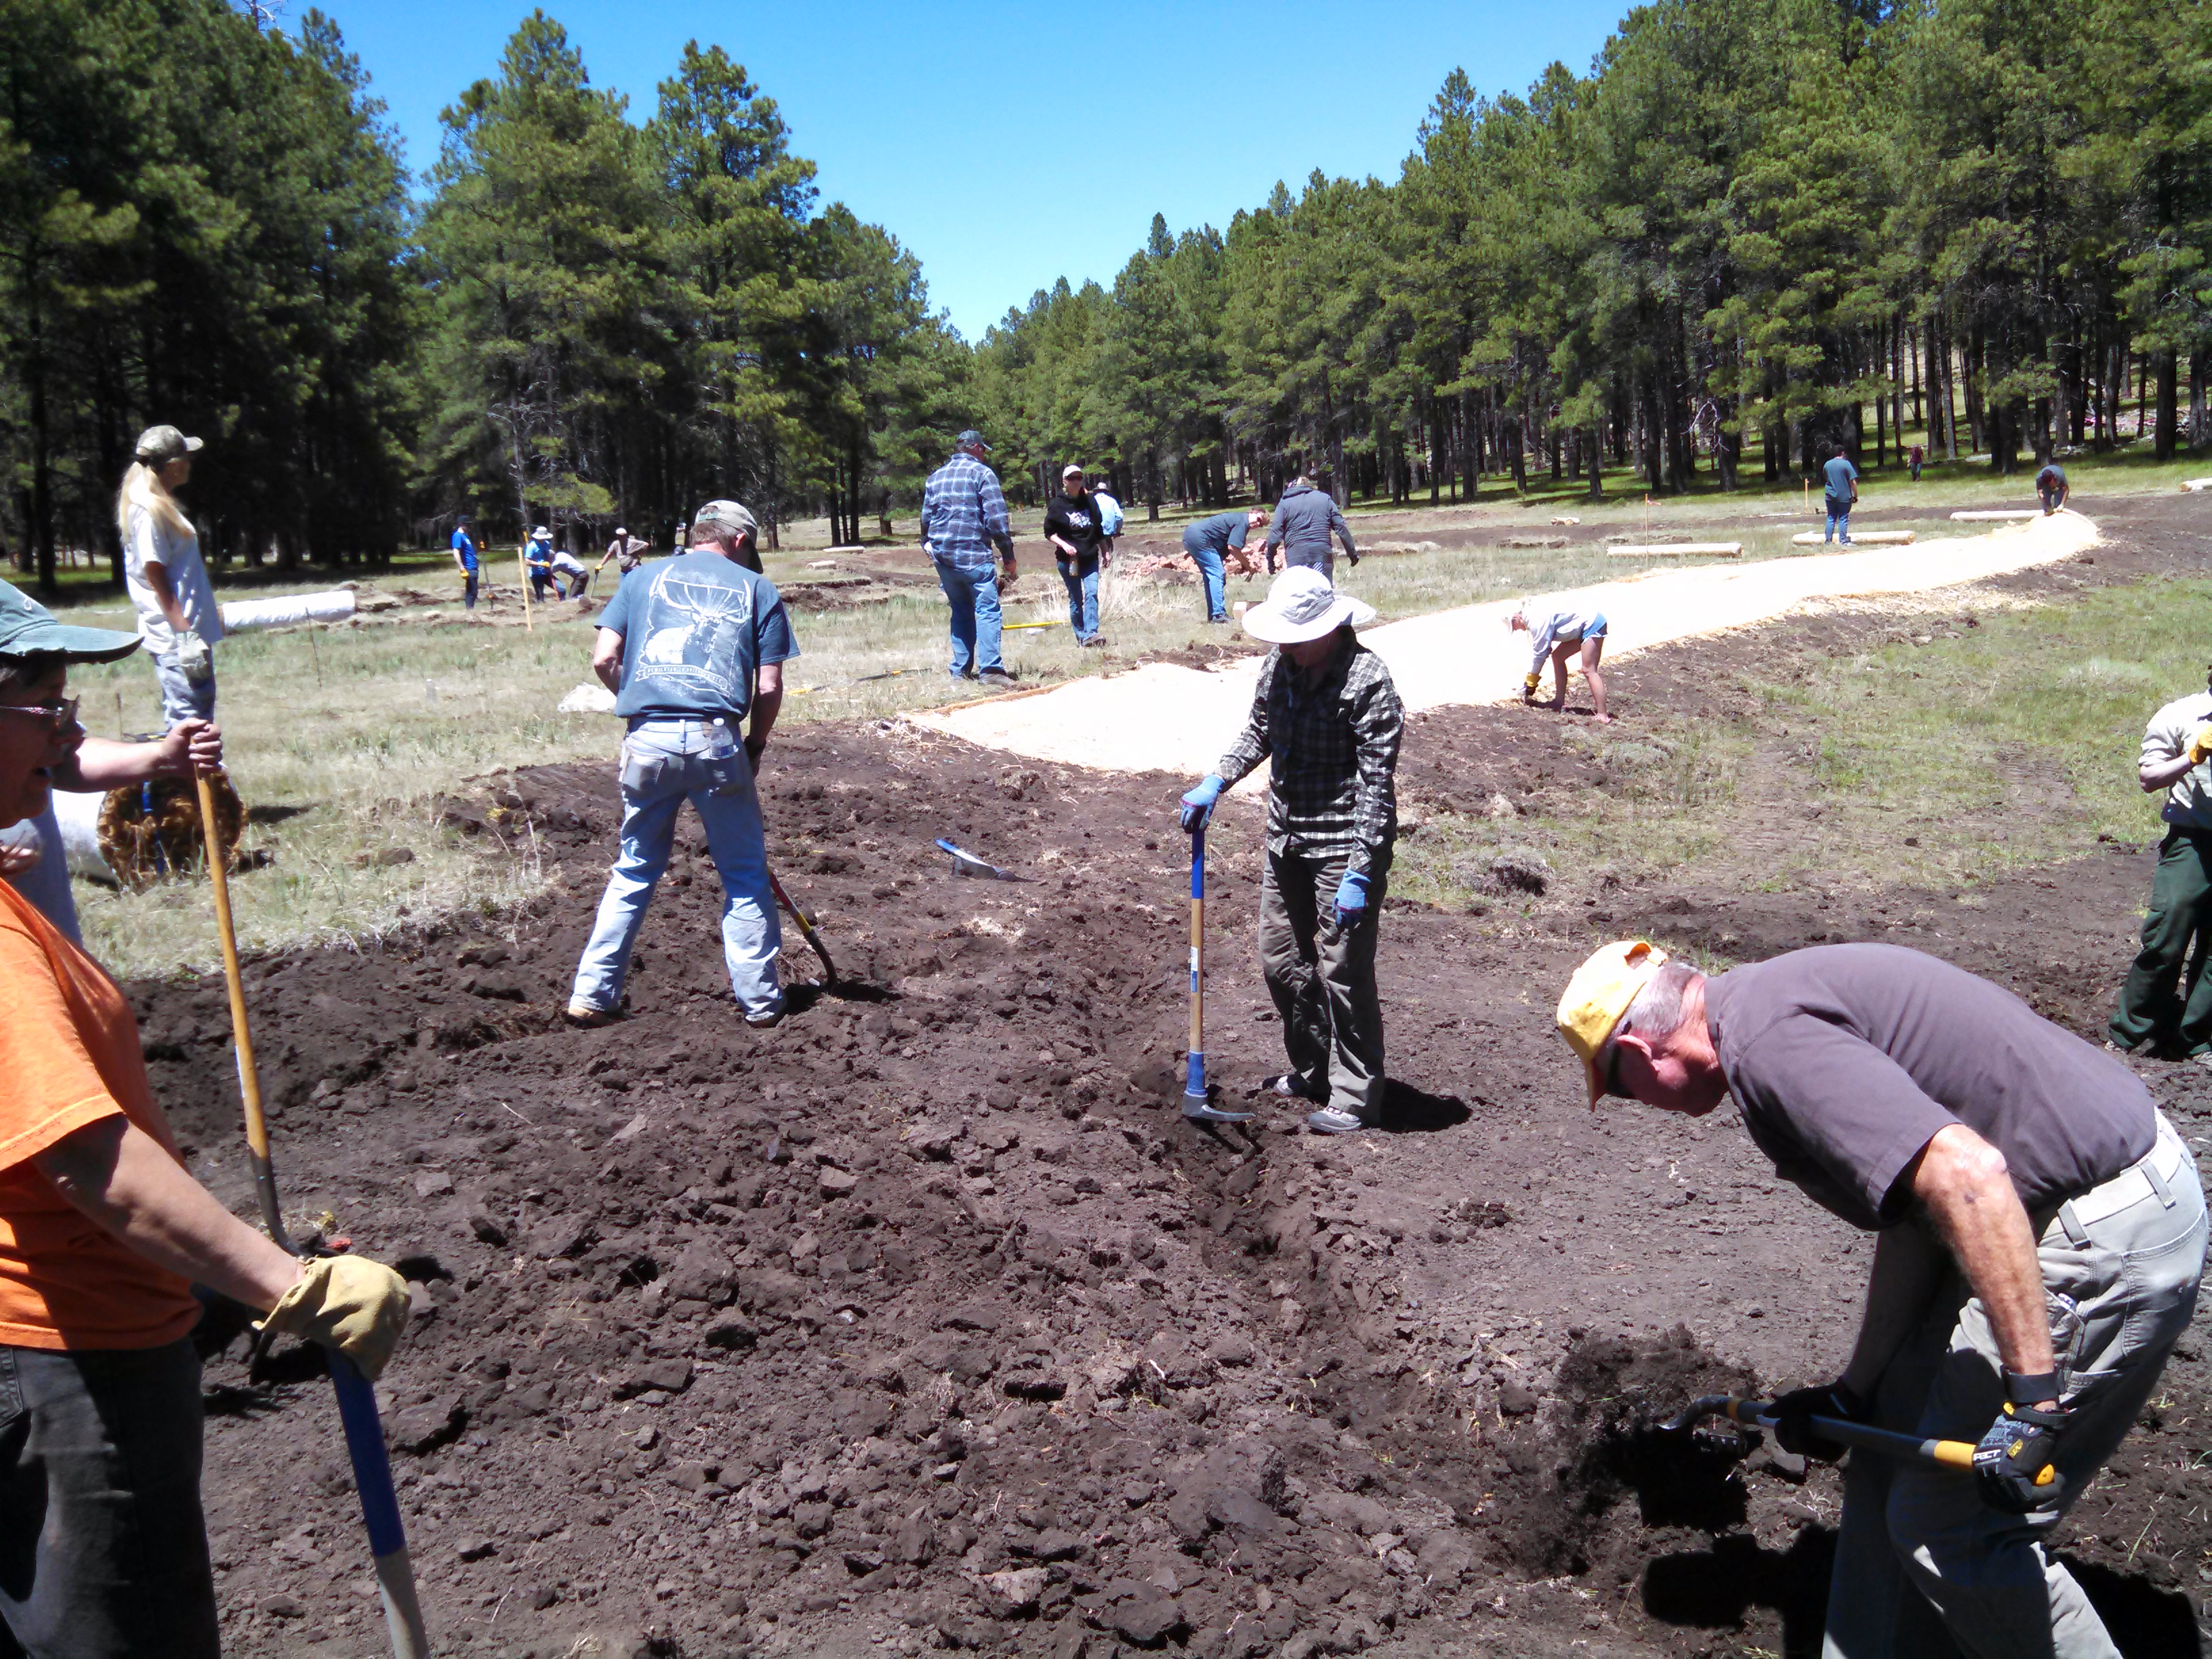 A group of people digging trenches in the groun and leveling a lighter colored soil in the background.